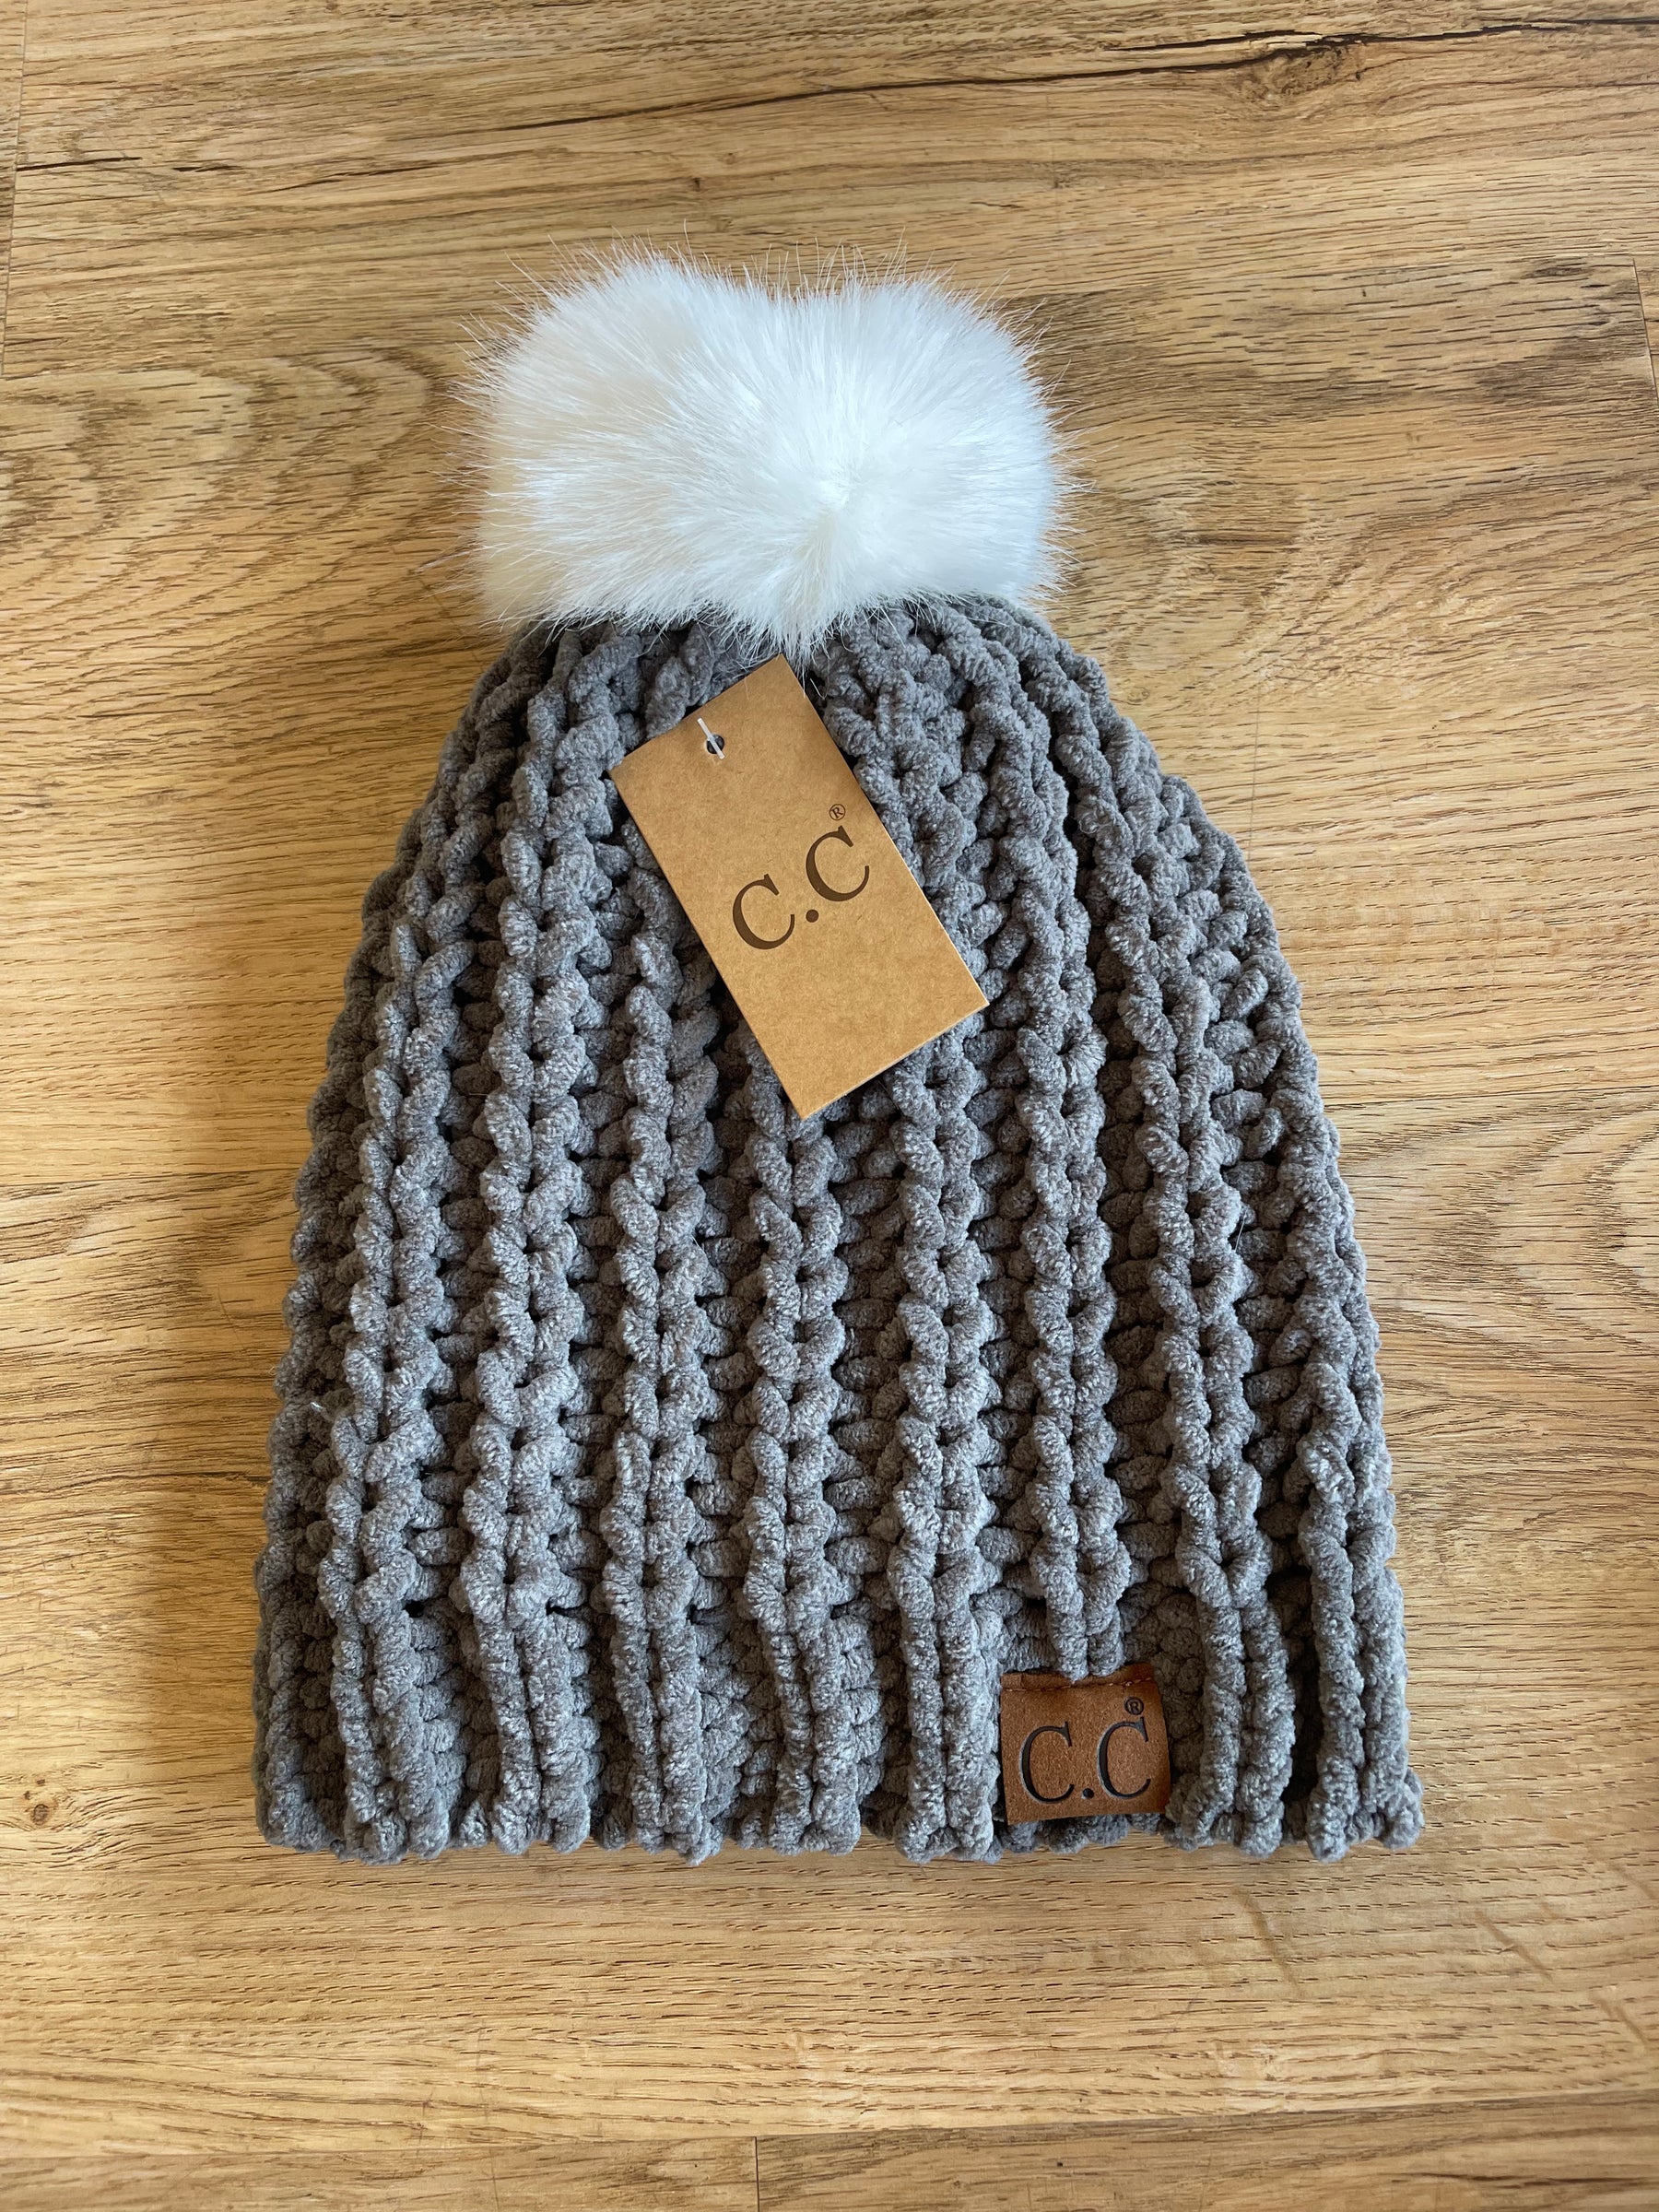 Chenille Chunky Knit Hat